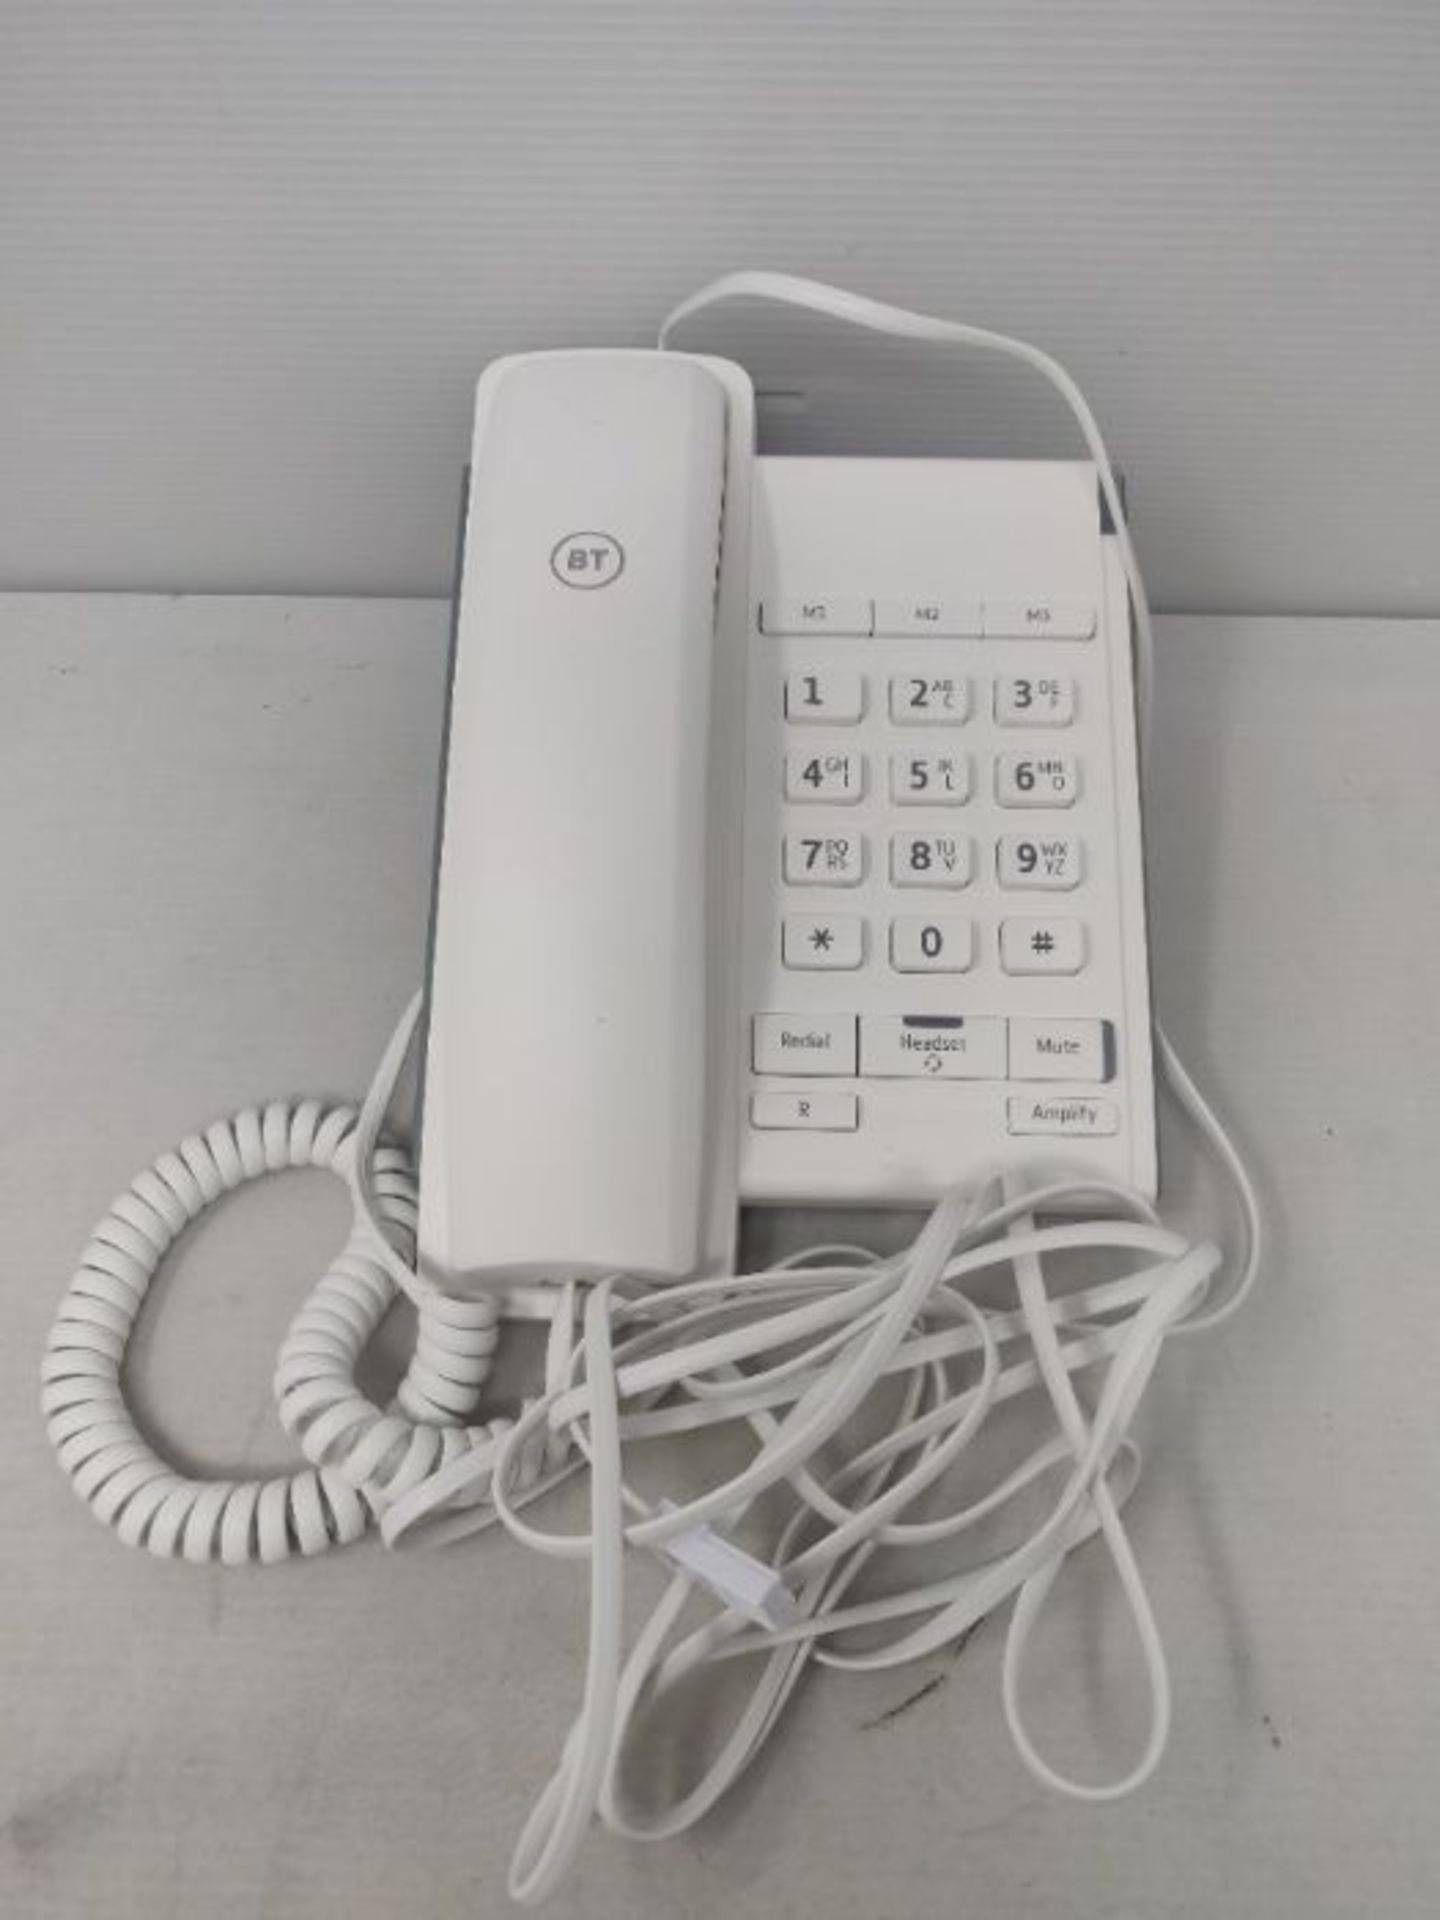 BT Converse 2100 Corded Telephone, White - Image 3 of 3